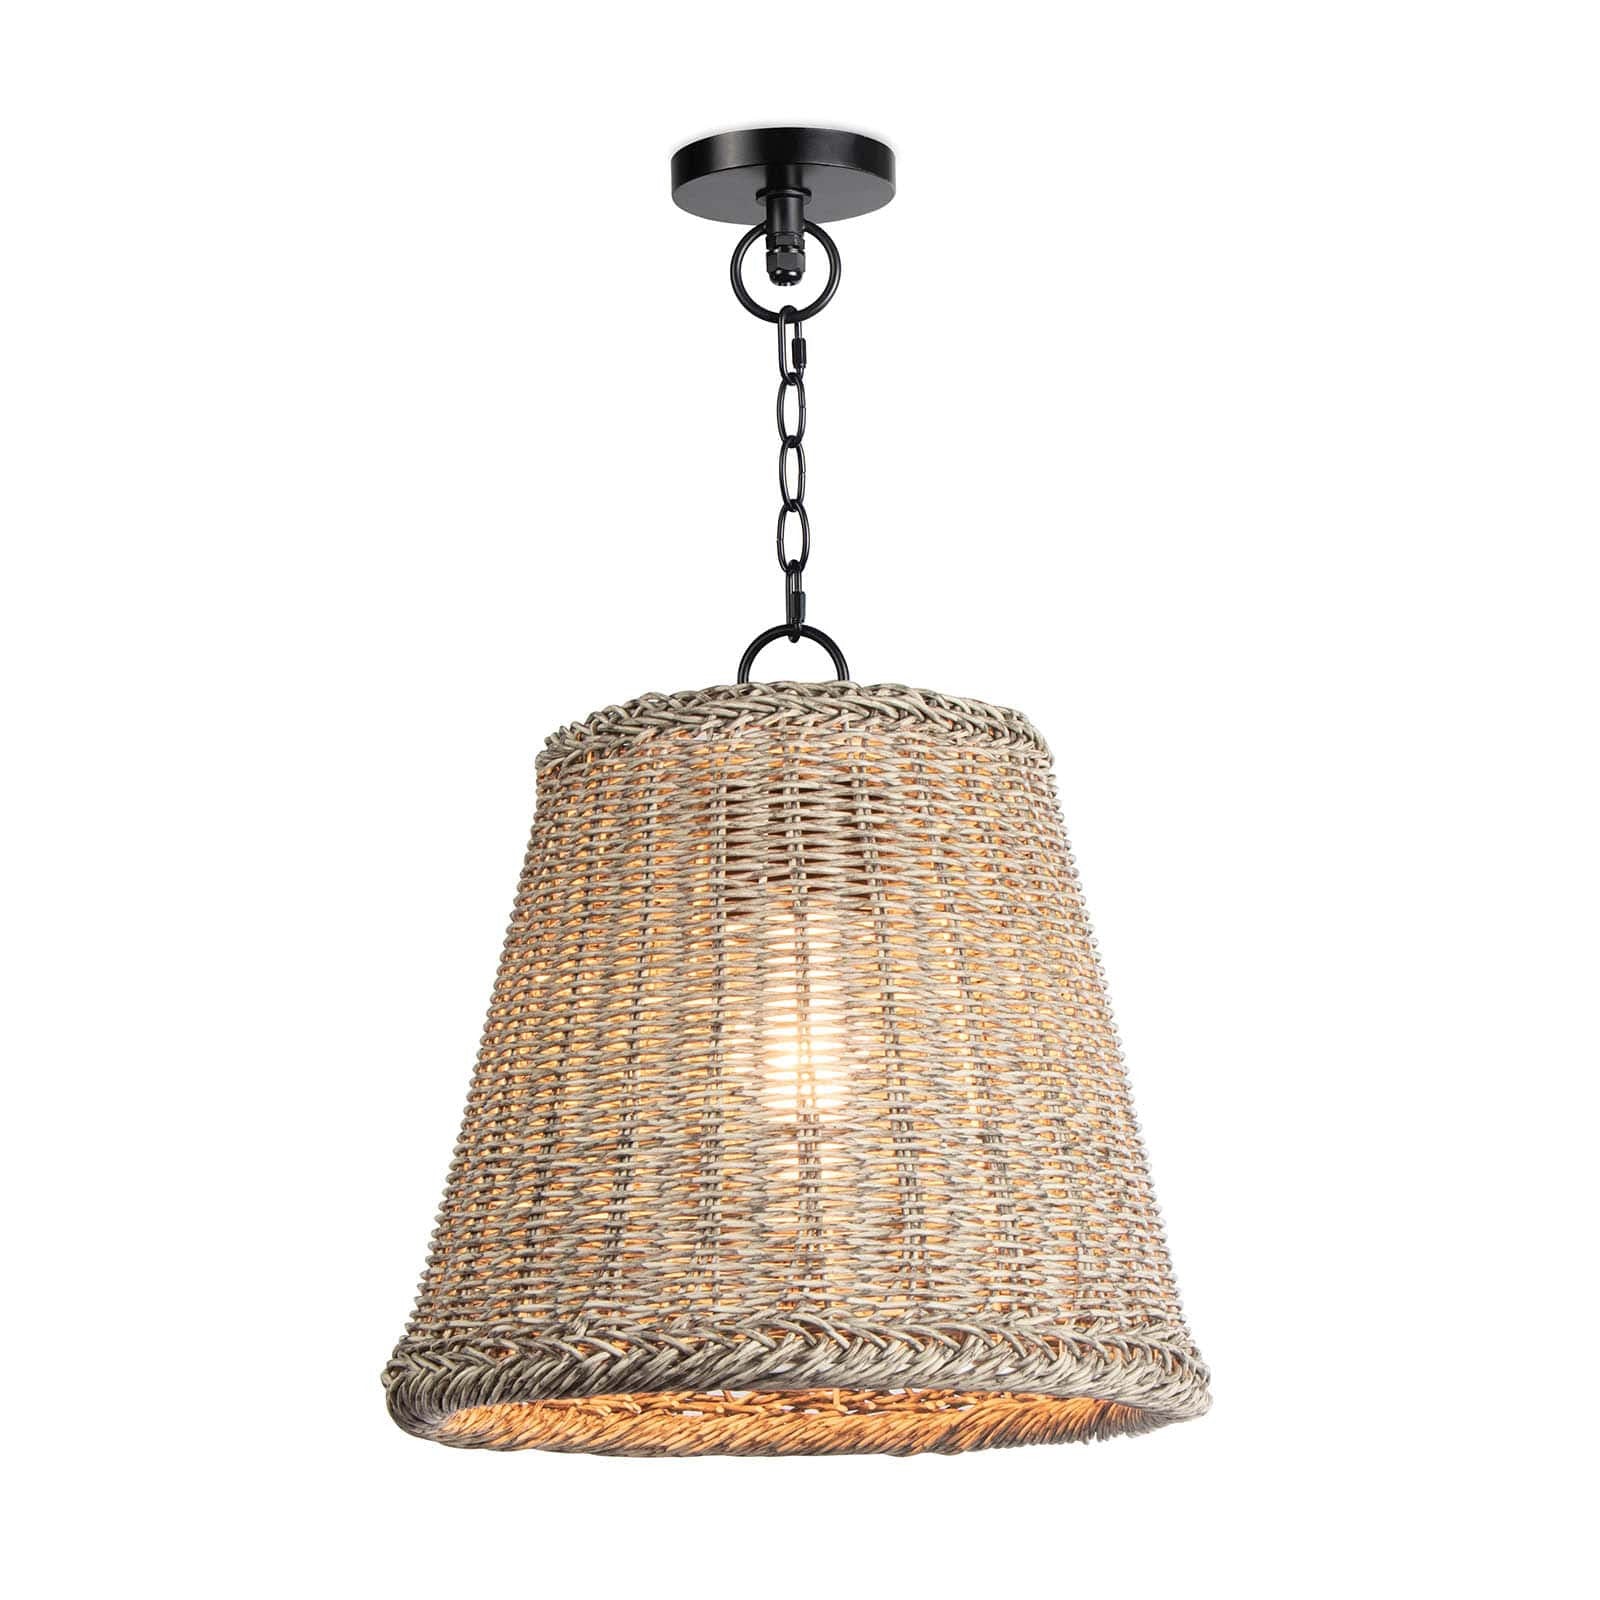 The Augustine Outdoor Pendant - Small provides a relaxed, coastal or southern style with its white-washed woven wicker basket pendant and blackened metal detailing. Add a little rustic charm to your outdoor living space with this organic luminary.  Dimensions: 18.5"h x 13.5"d x 13.5"d